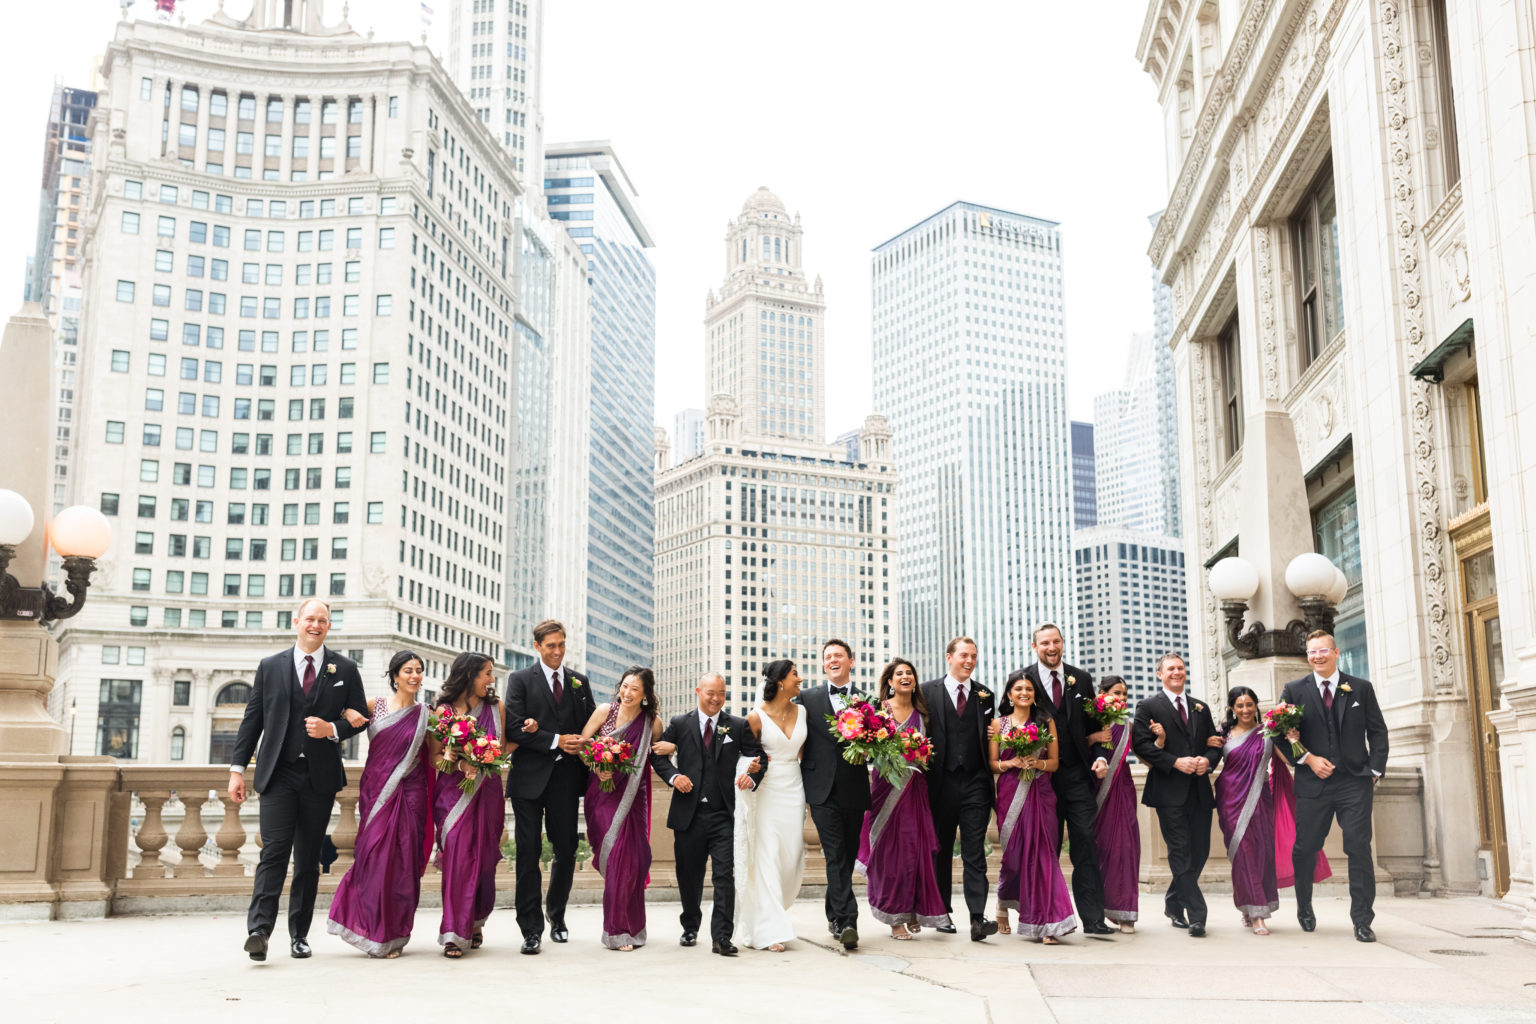 Inexpensive Places to Get Married in Chicago